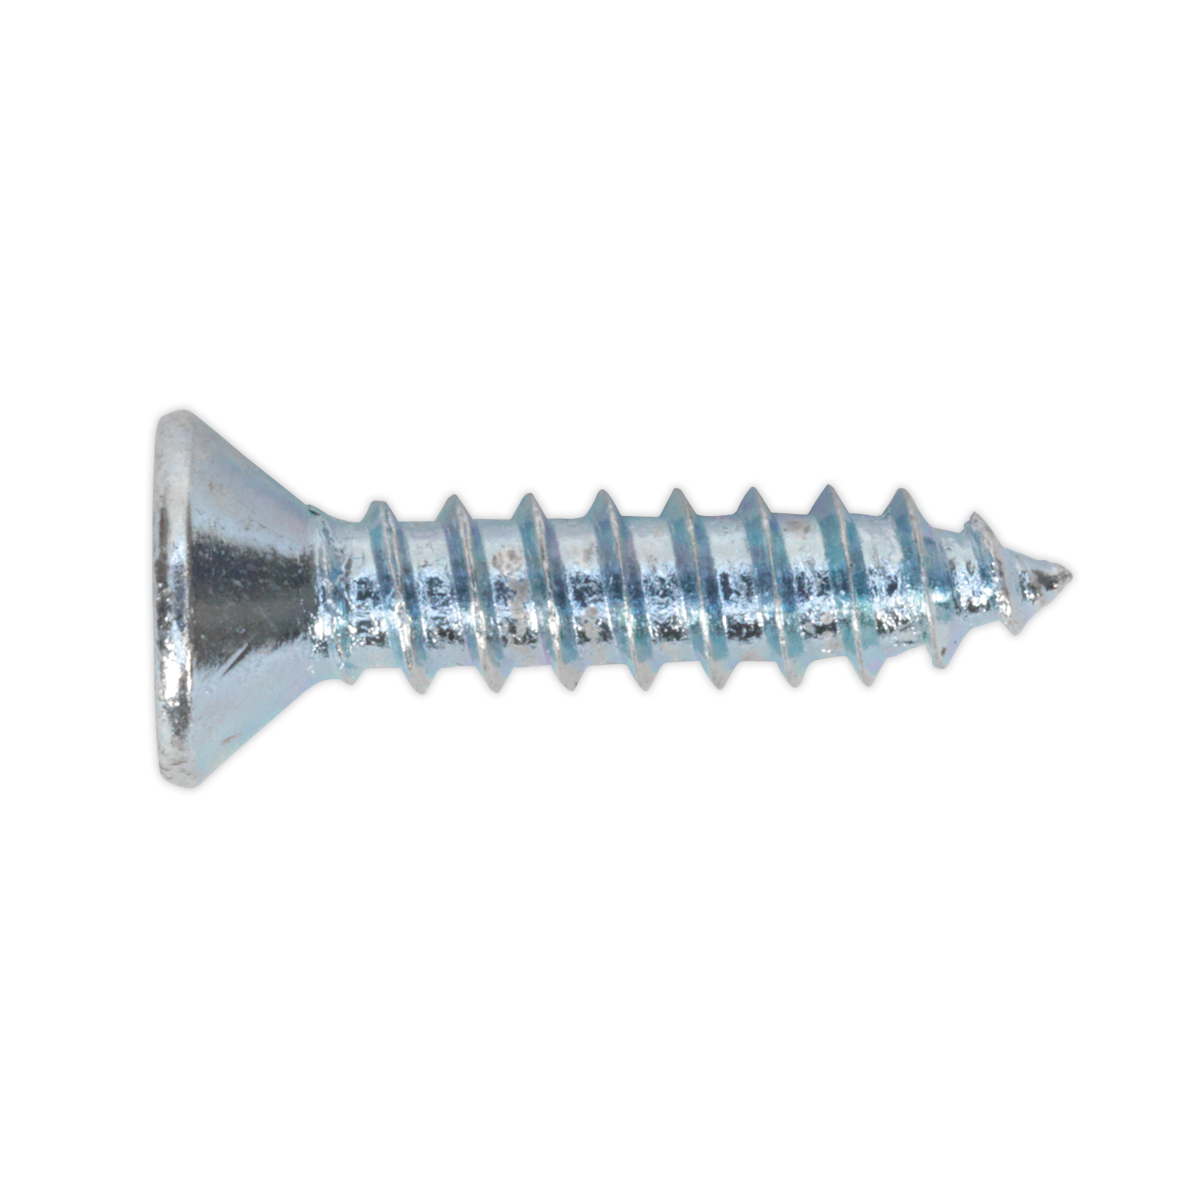 Self Tapping Screw 3.5 x 16mm Countersunk Pozi Pack of 100 - ST3516 - Farming Parts